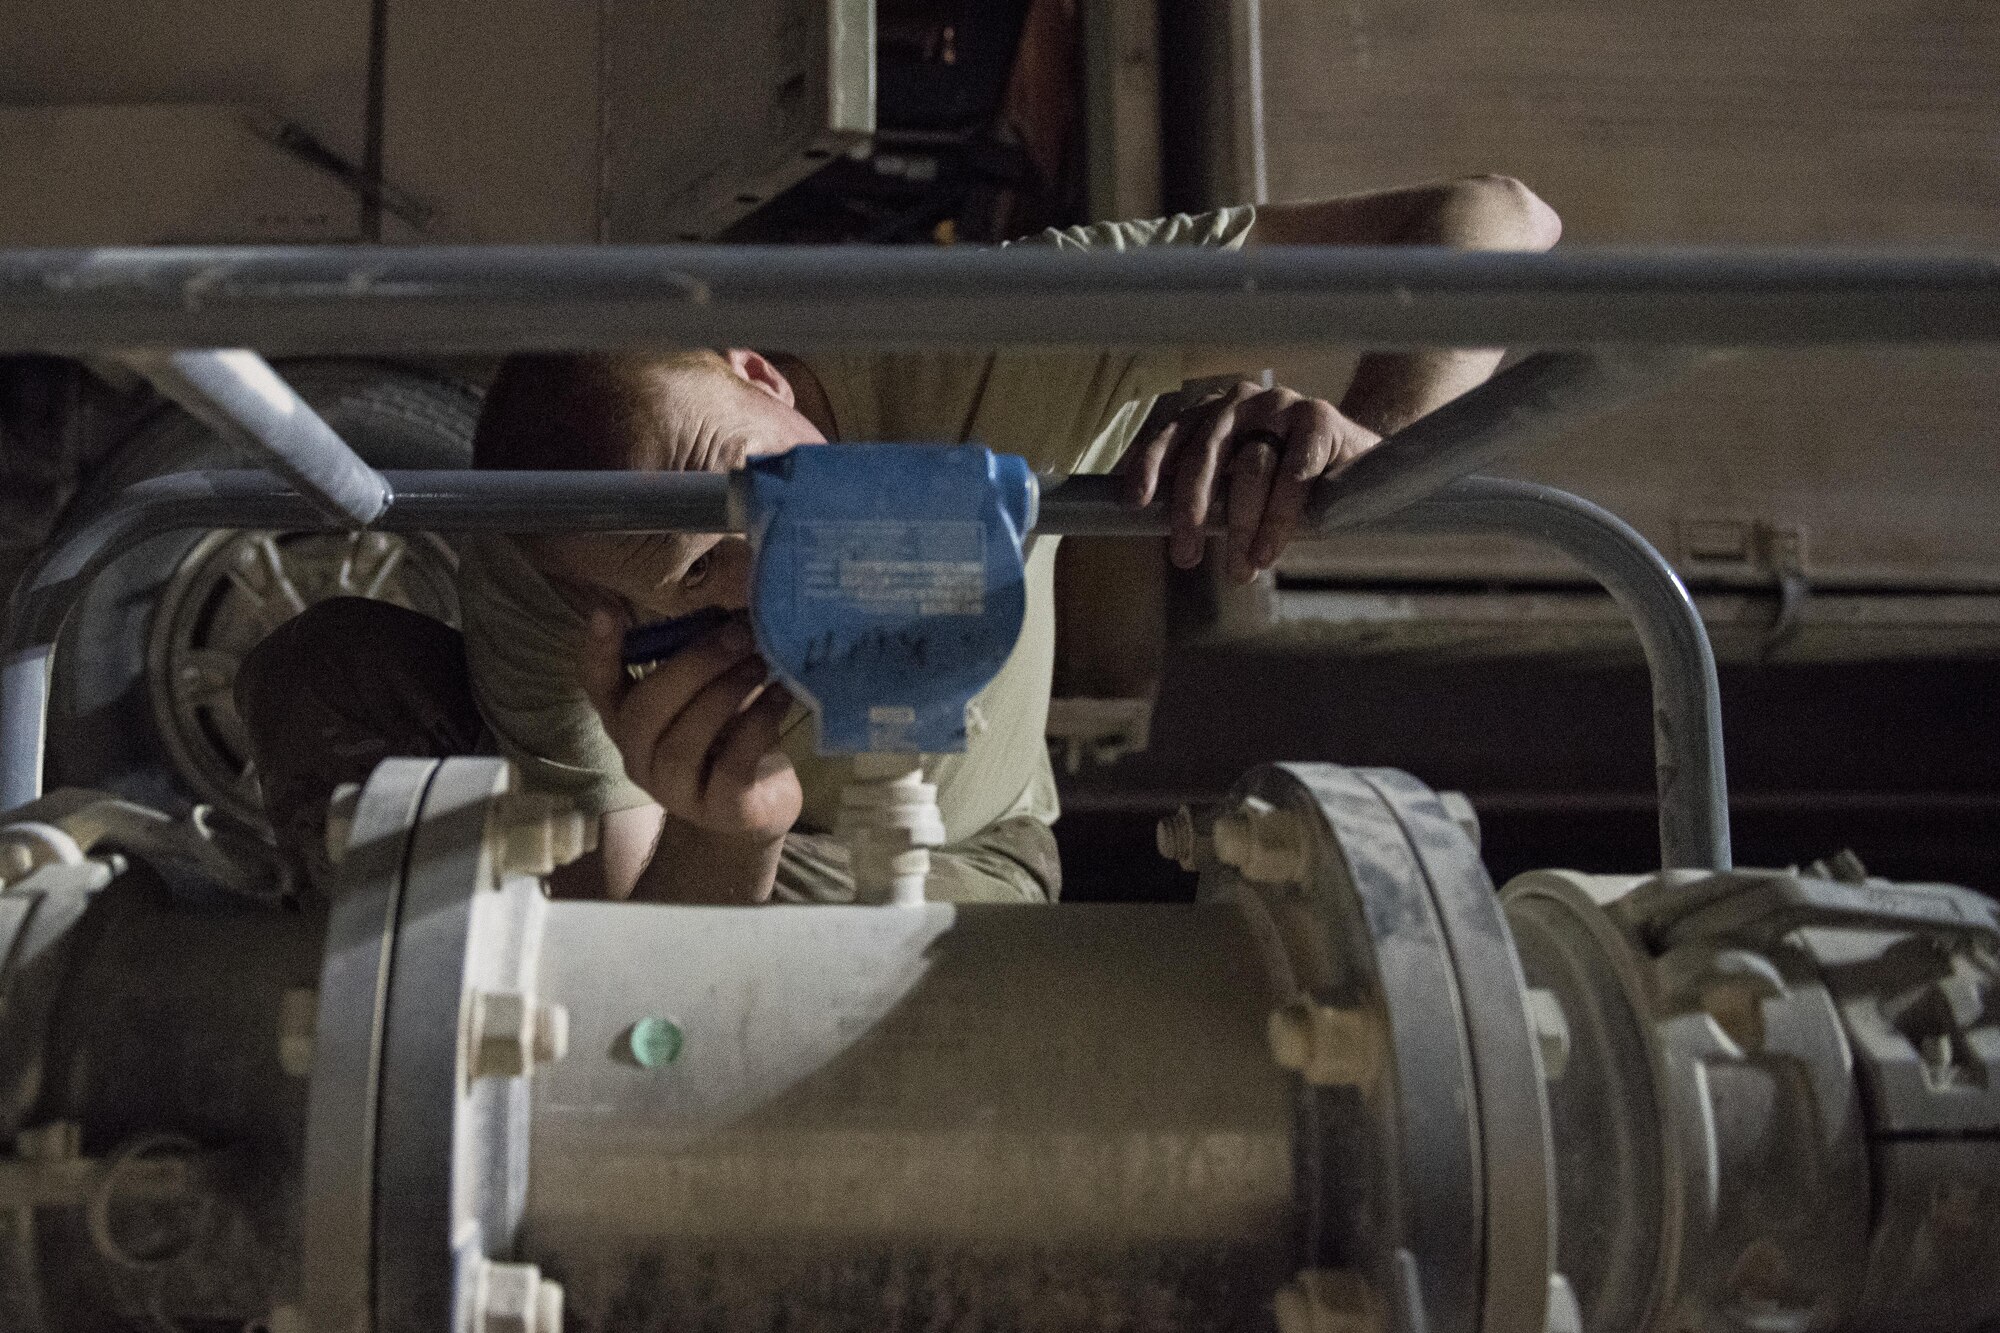 Staff Sgt. Kenneth Zaun, 332nd Expeditionary Logistics Readiness Squadron fuels flight controller, checks a fuel meter July 22, 2017 in Southwest Asia. The 332nd ELRS manages the fuel supply for aircraft, vehicles and generators throughout the installation. (U.S. Air Force photo/Senior Airman Damon Kasberg)